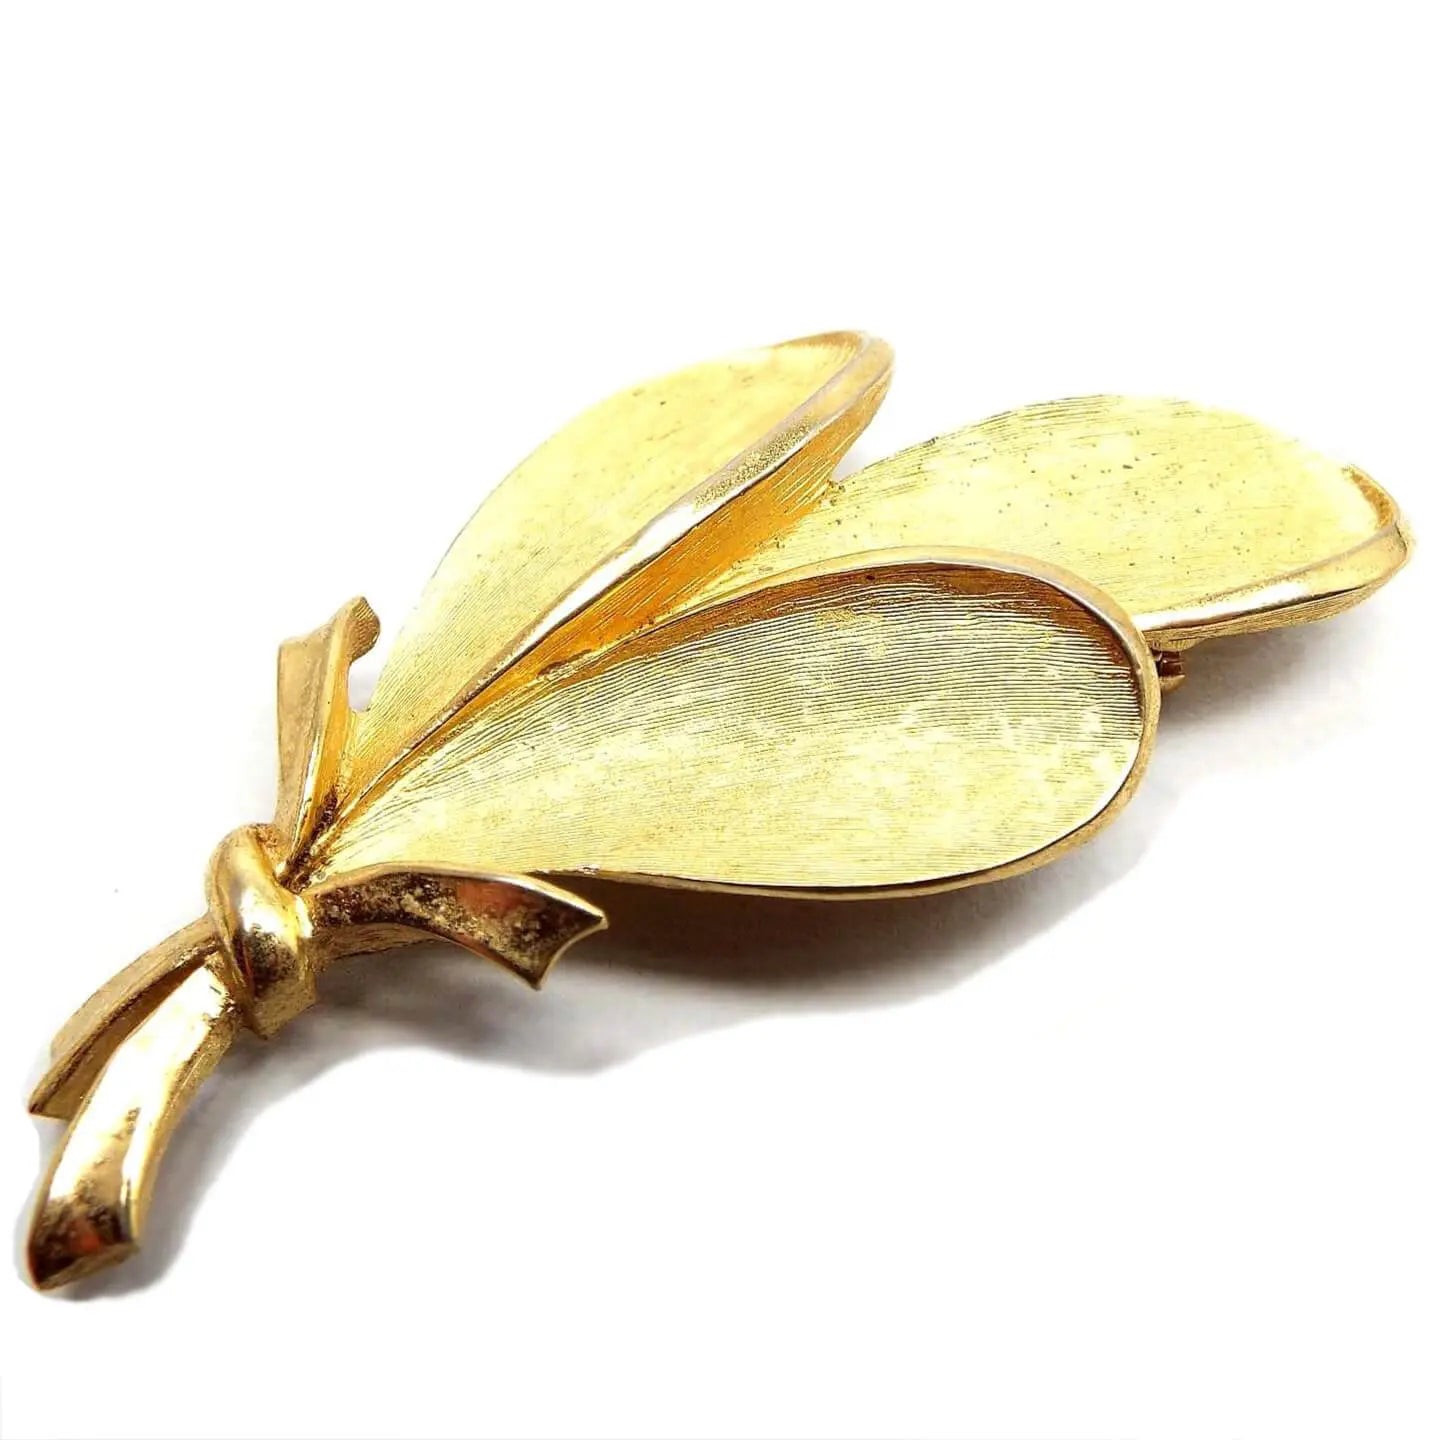 Front view of the Mid Century vintage Crown Trifari brooch pin. The metal is gold tone in color and has a matte brushed appearance. There are three leaves with teardrop shaped ends that look like they're tied together at the stems with a ribbon.